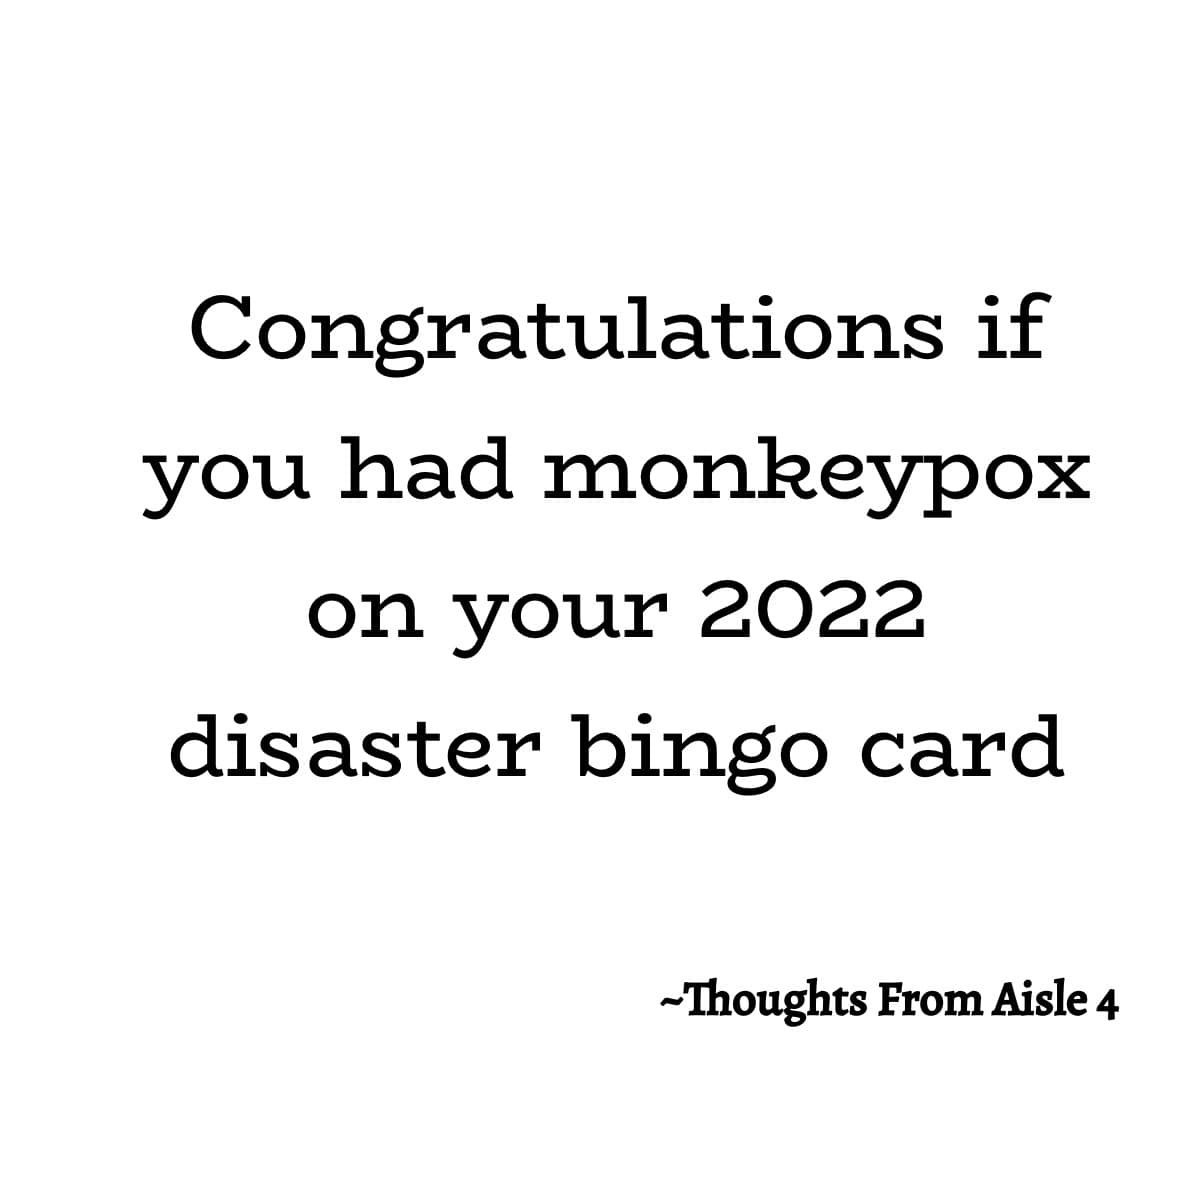 funny pictures - funny angle - Congratulations if you had monkeypox on your 2022 disaster bingo card ~Thoughts From Aisle 4